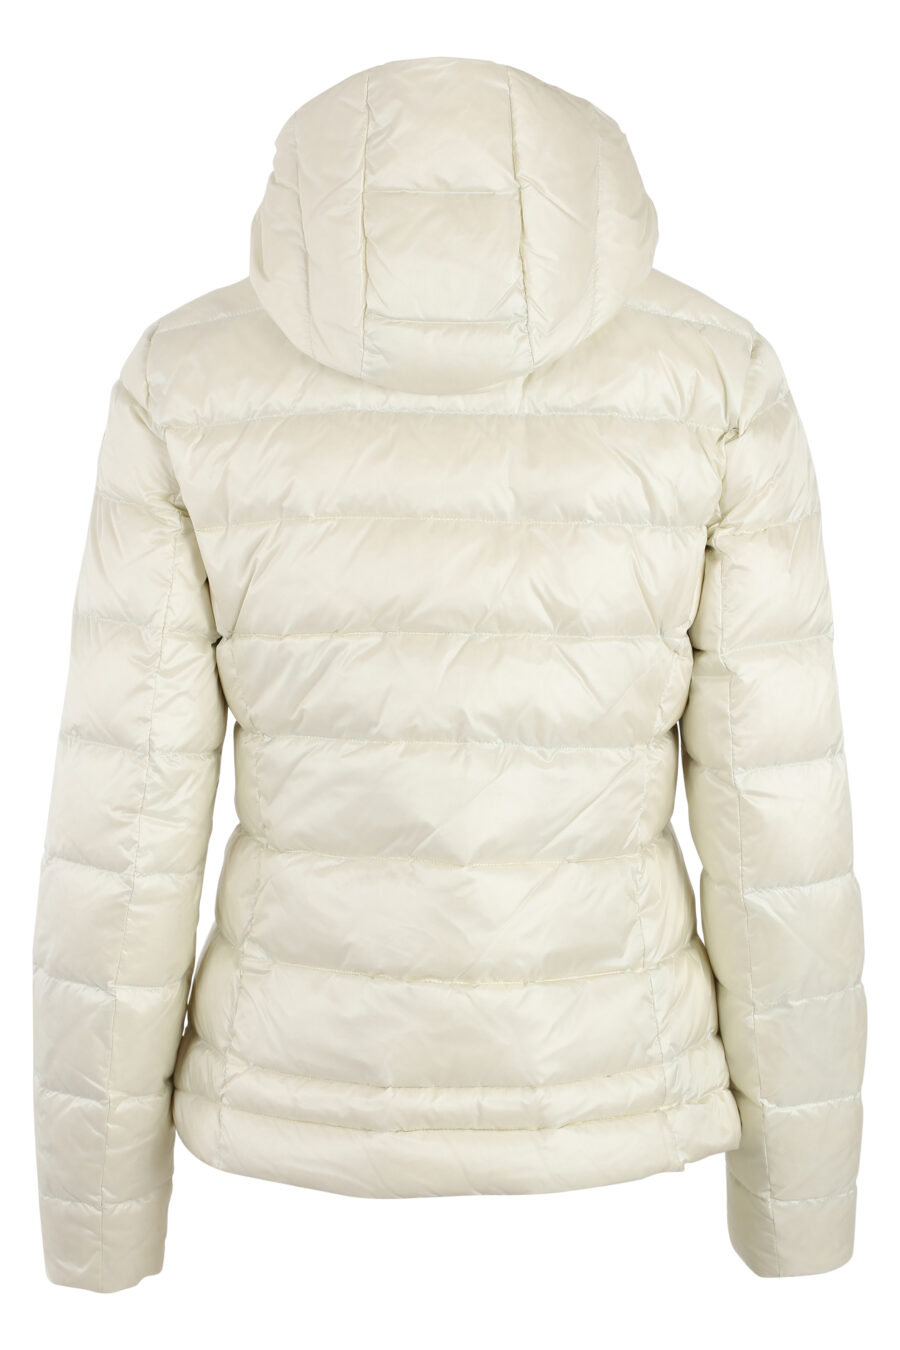 Pearl white hooded jacket with brown lining - IMG 4905